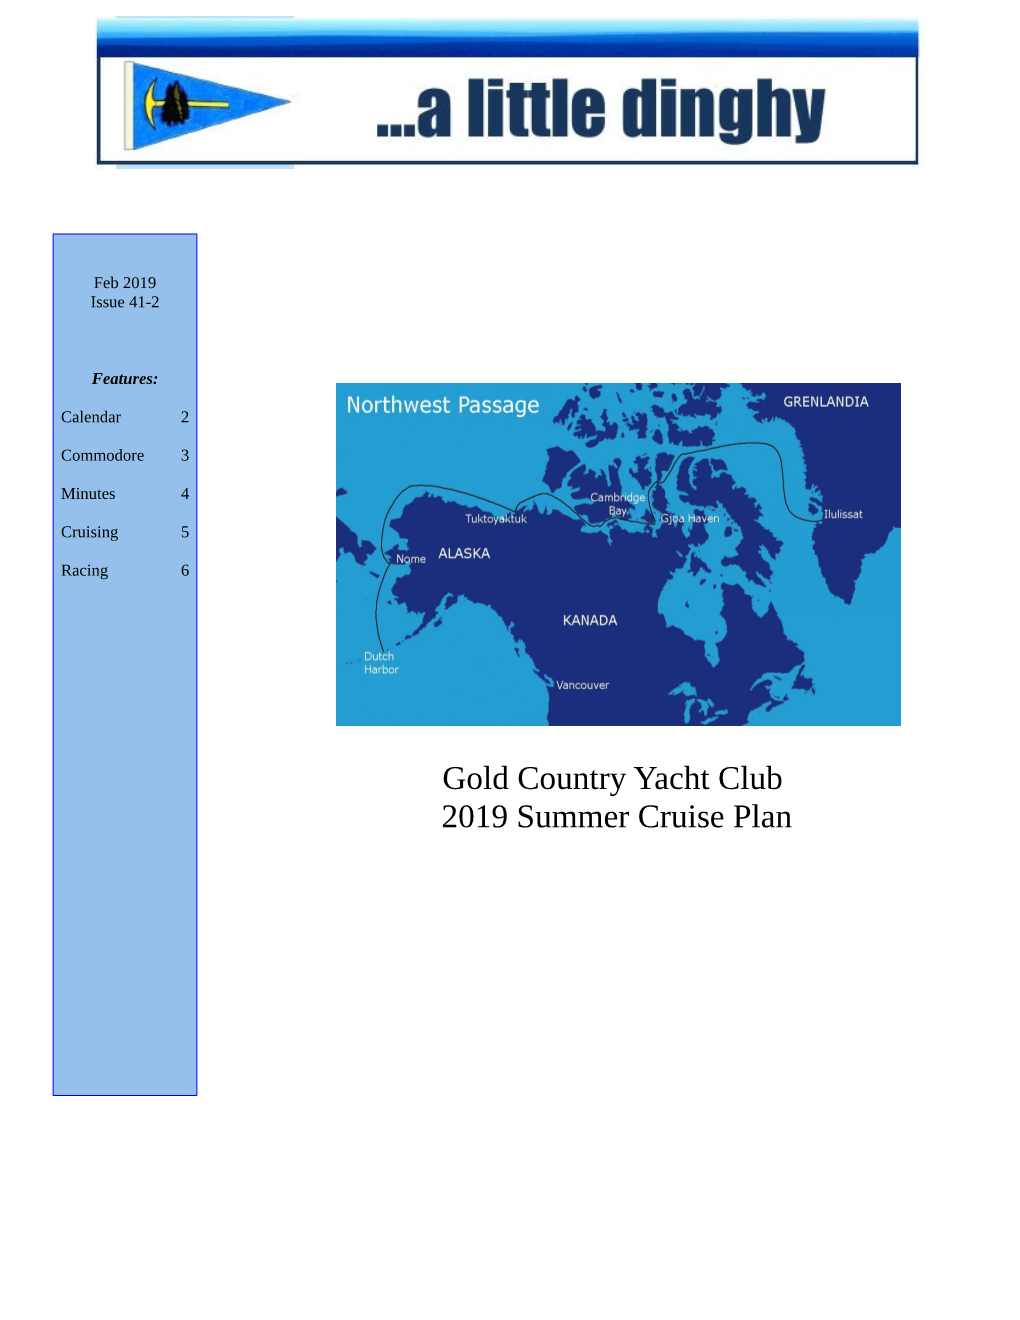 Gold Country Yacht Club 2019 Summer Cruise Plan at Our Helm